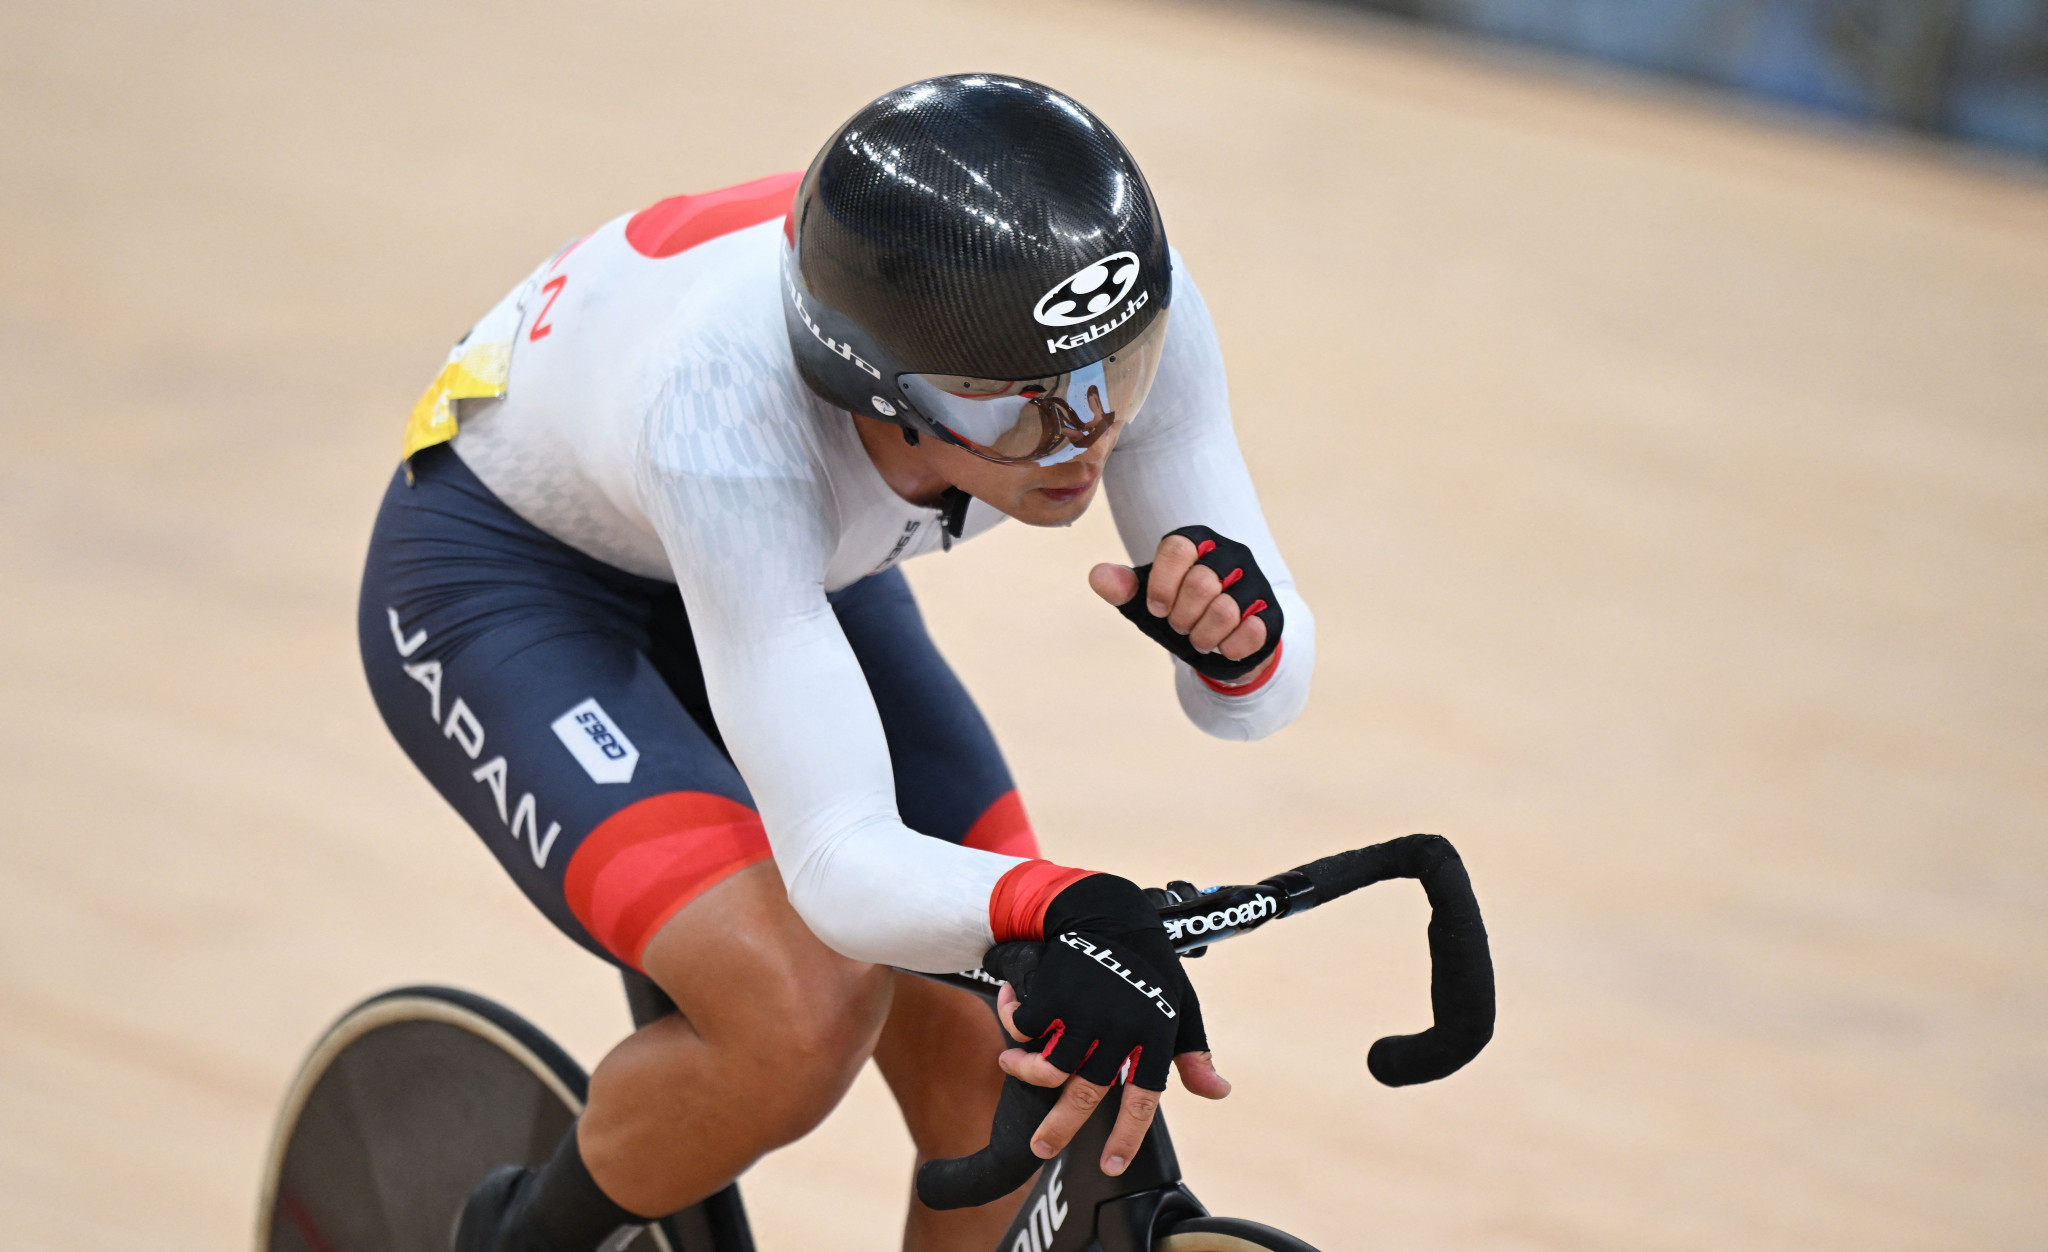 Kazushige Kuboki topped the standings in the men's omnium final to complete a Japanese track cycling hat-trick of golds on the day ©Getty Images